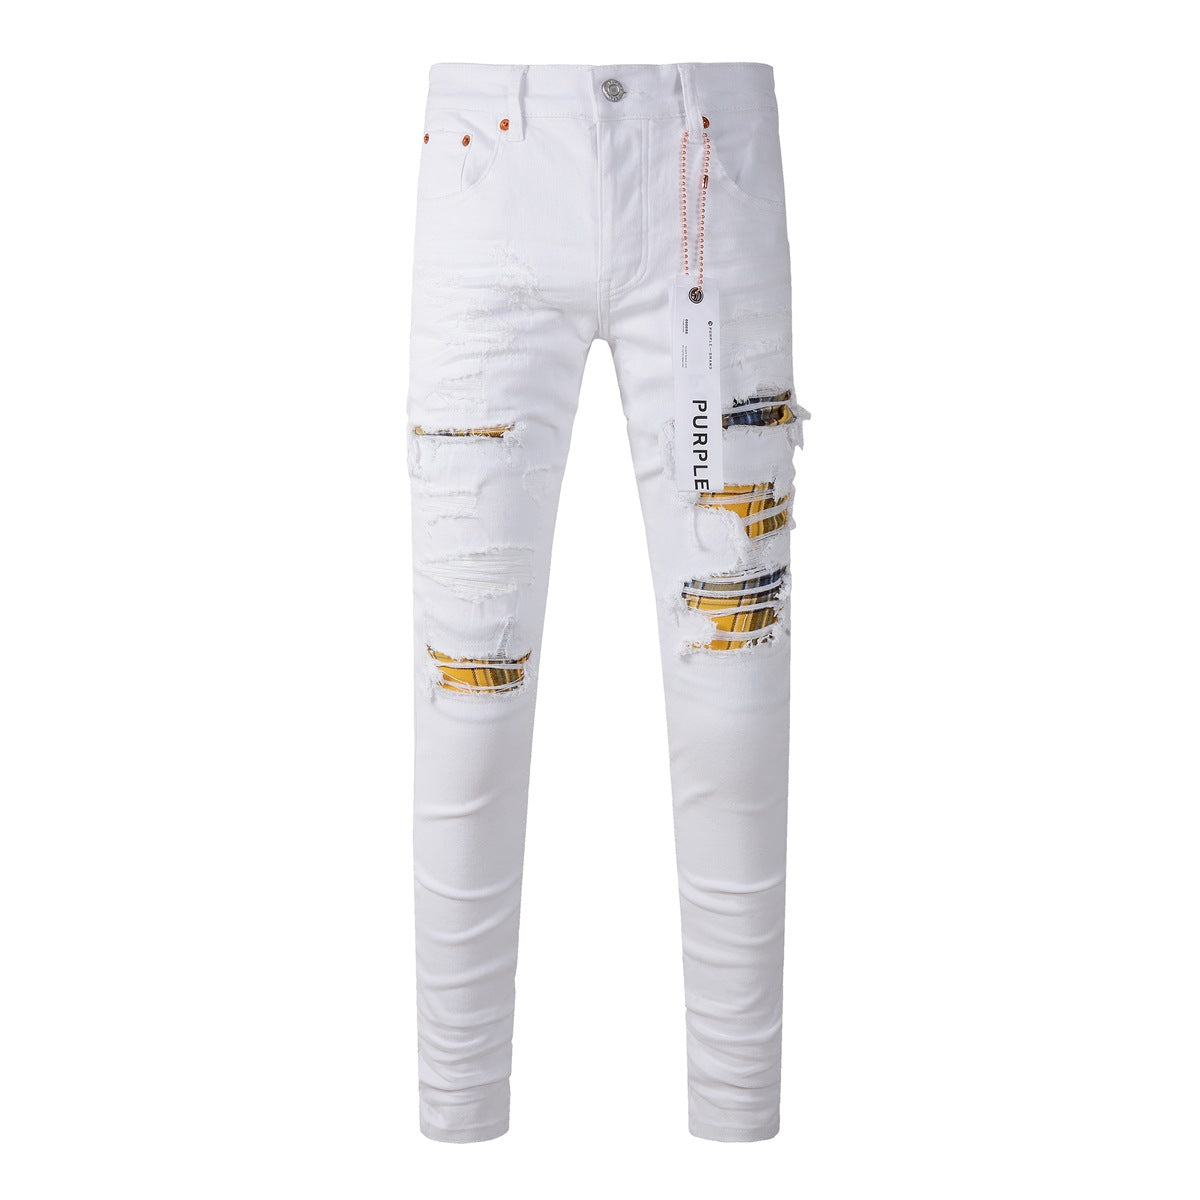 Nwt White Mens Jeans Distressed Ripped Personality Prints Patchwork